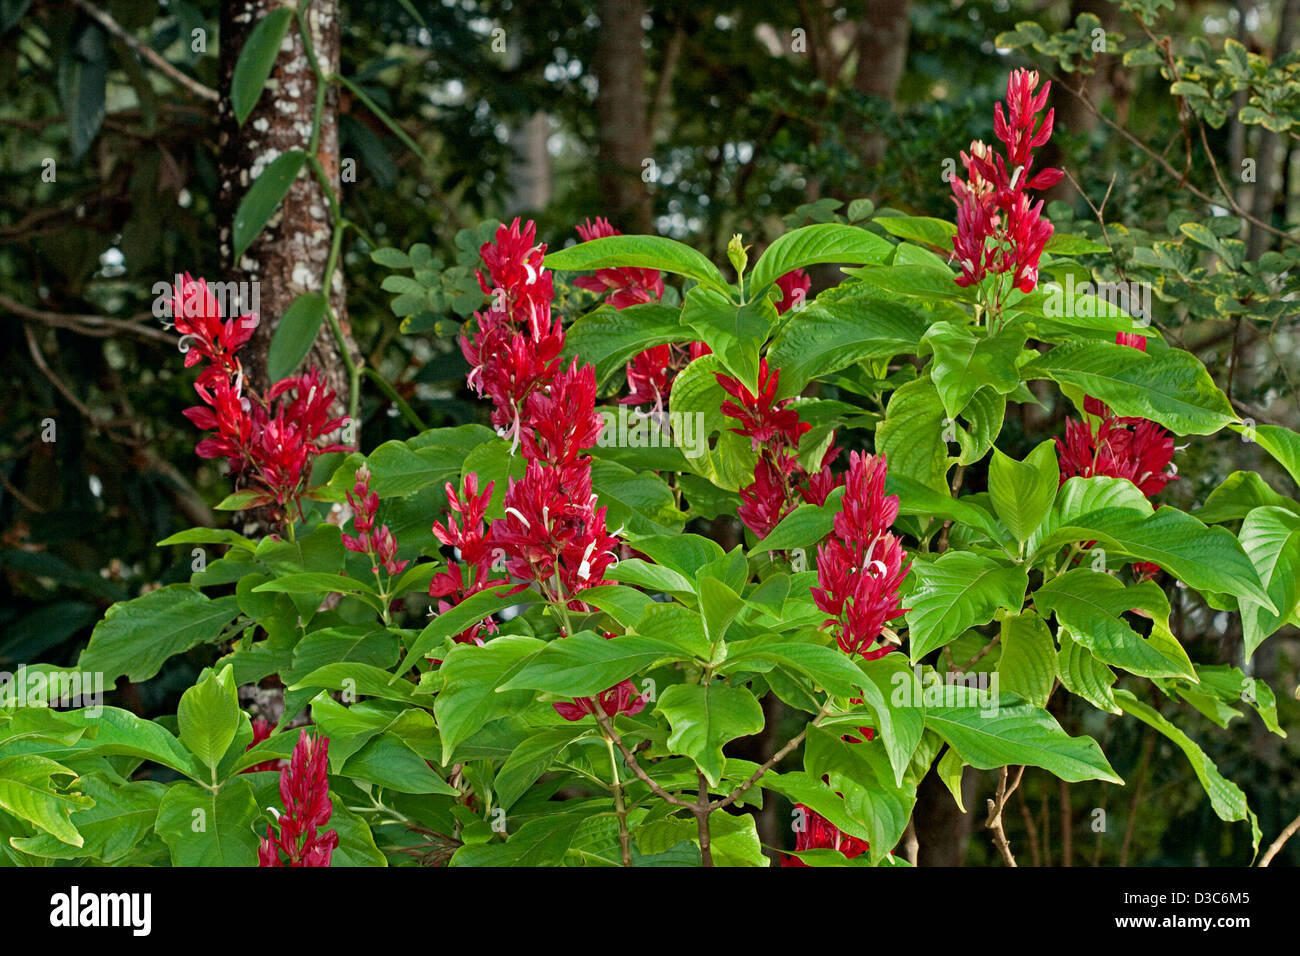 Spikes of bright red flowers and emerald green foliage of Megaskepasma erythrochlamys - Venezuelan red cloak - a flowering shrub Stock Photo